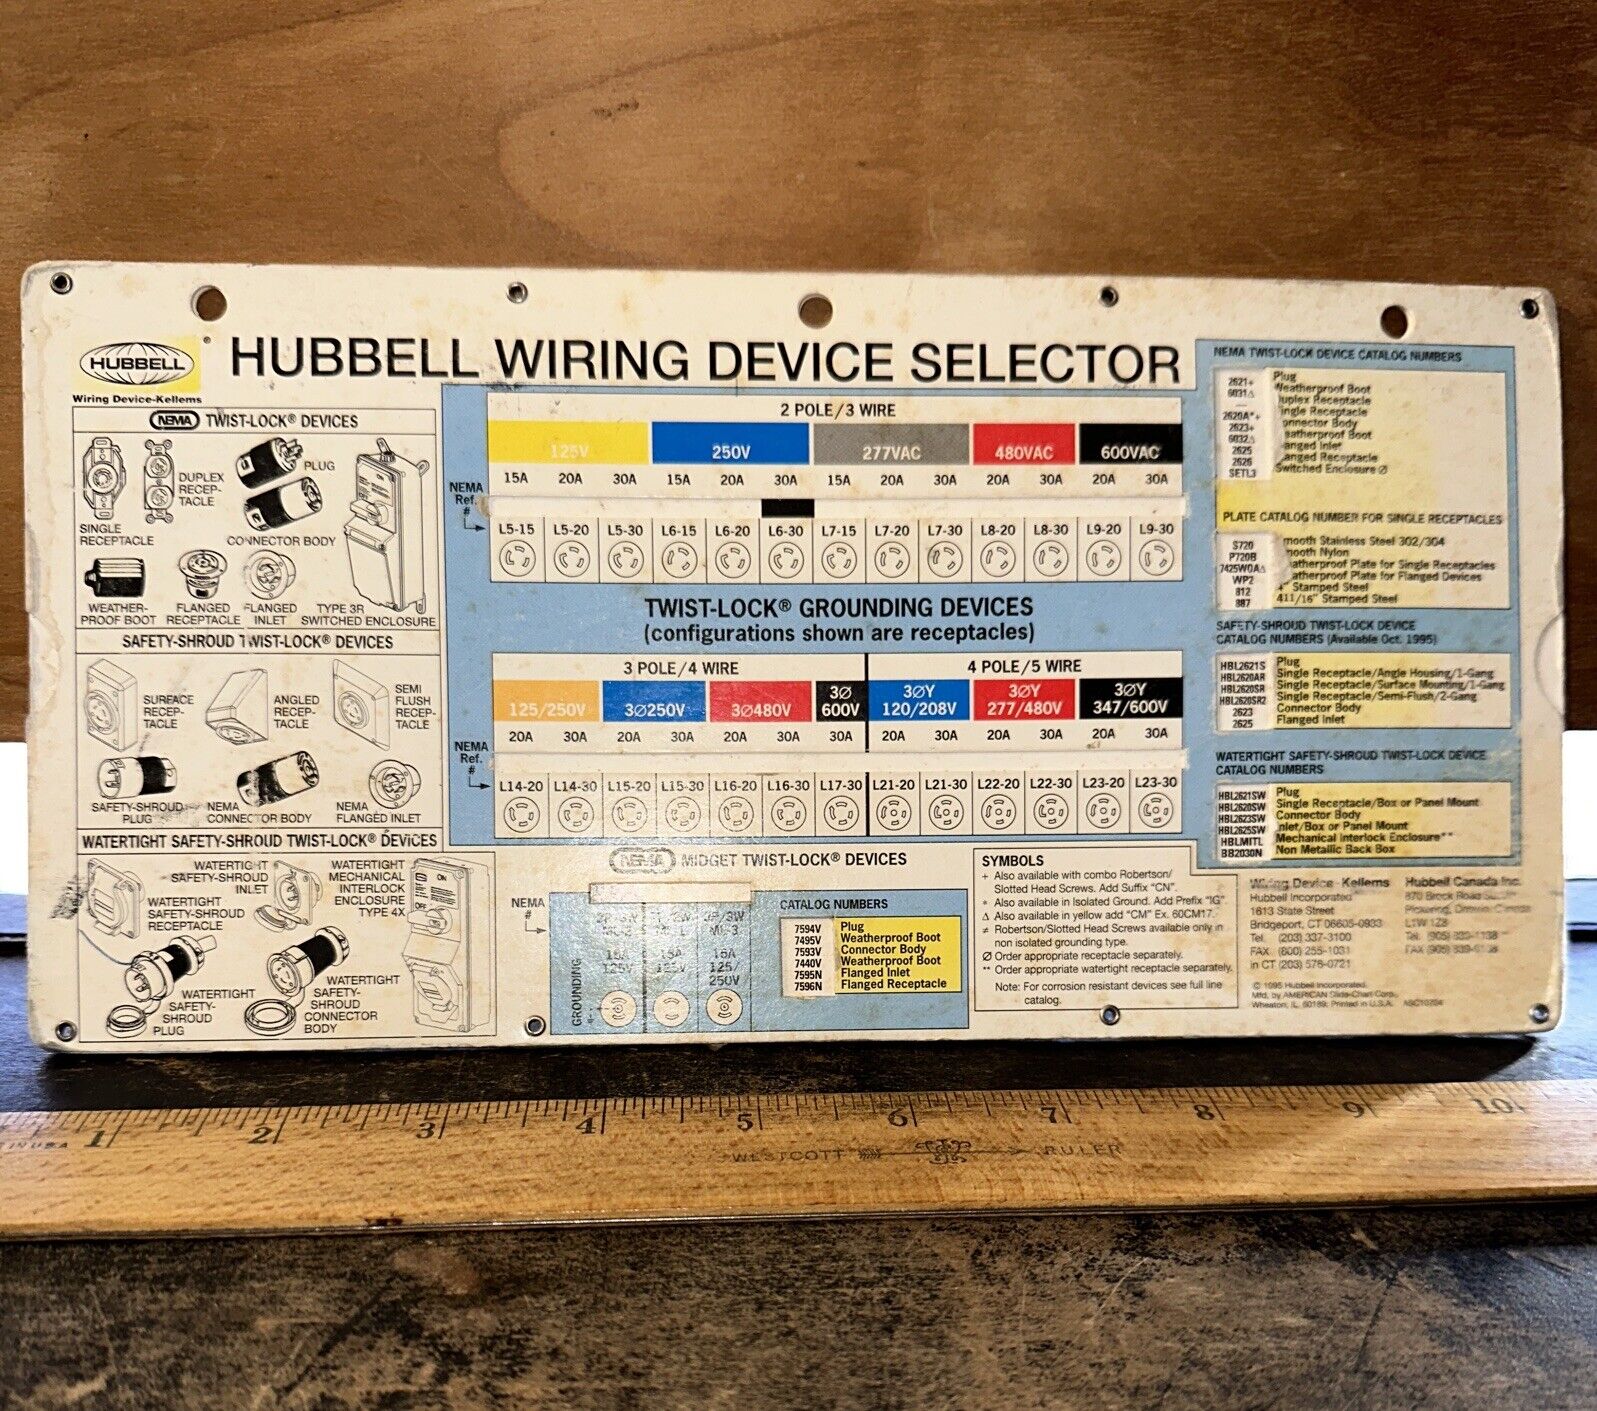 Vintage Hubbell Wiring Device Selector -Slide Rule- 1995 Twist-Lock Devices.